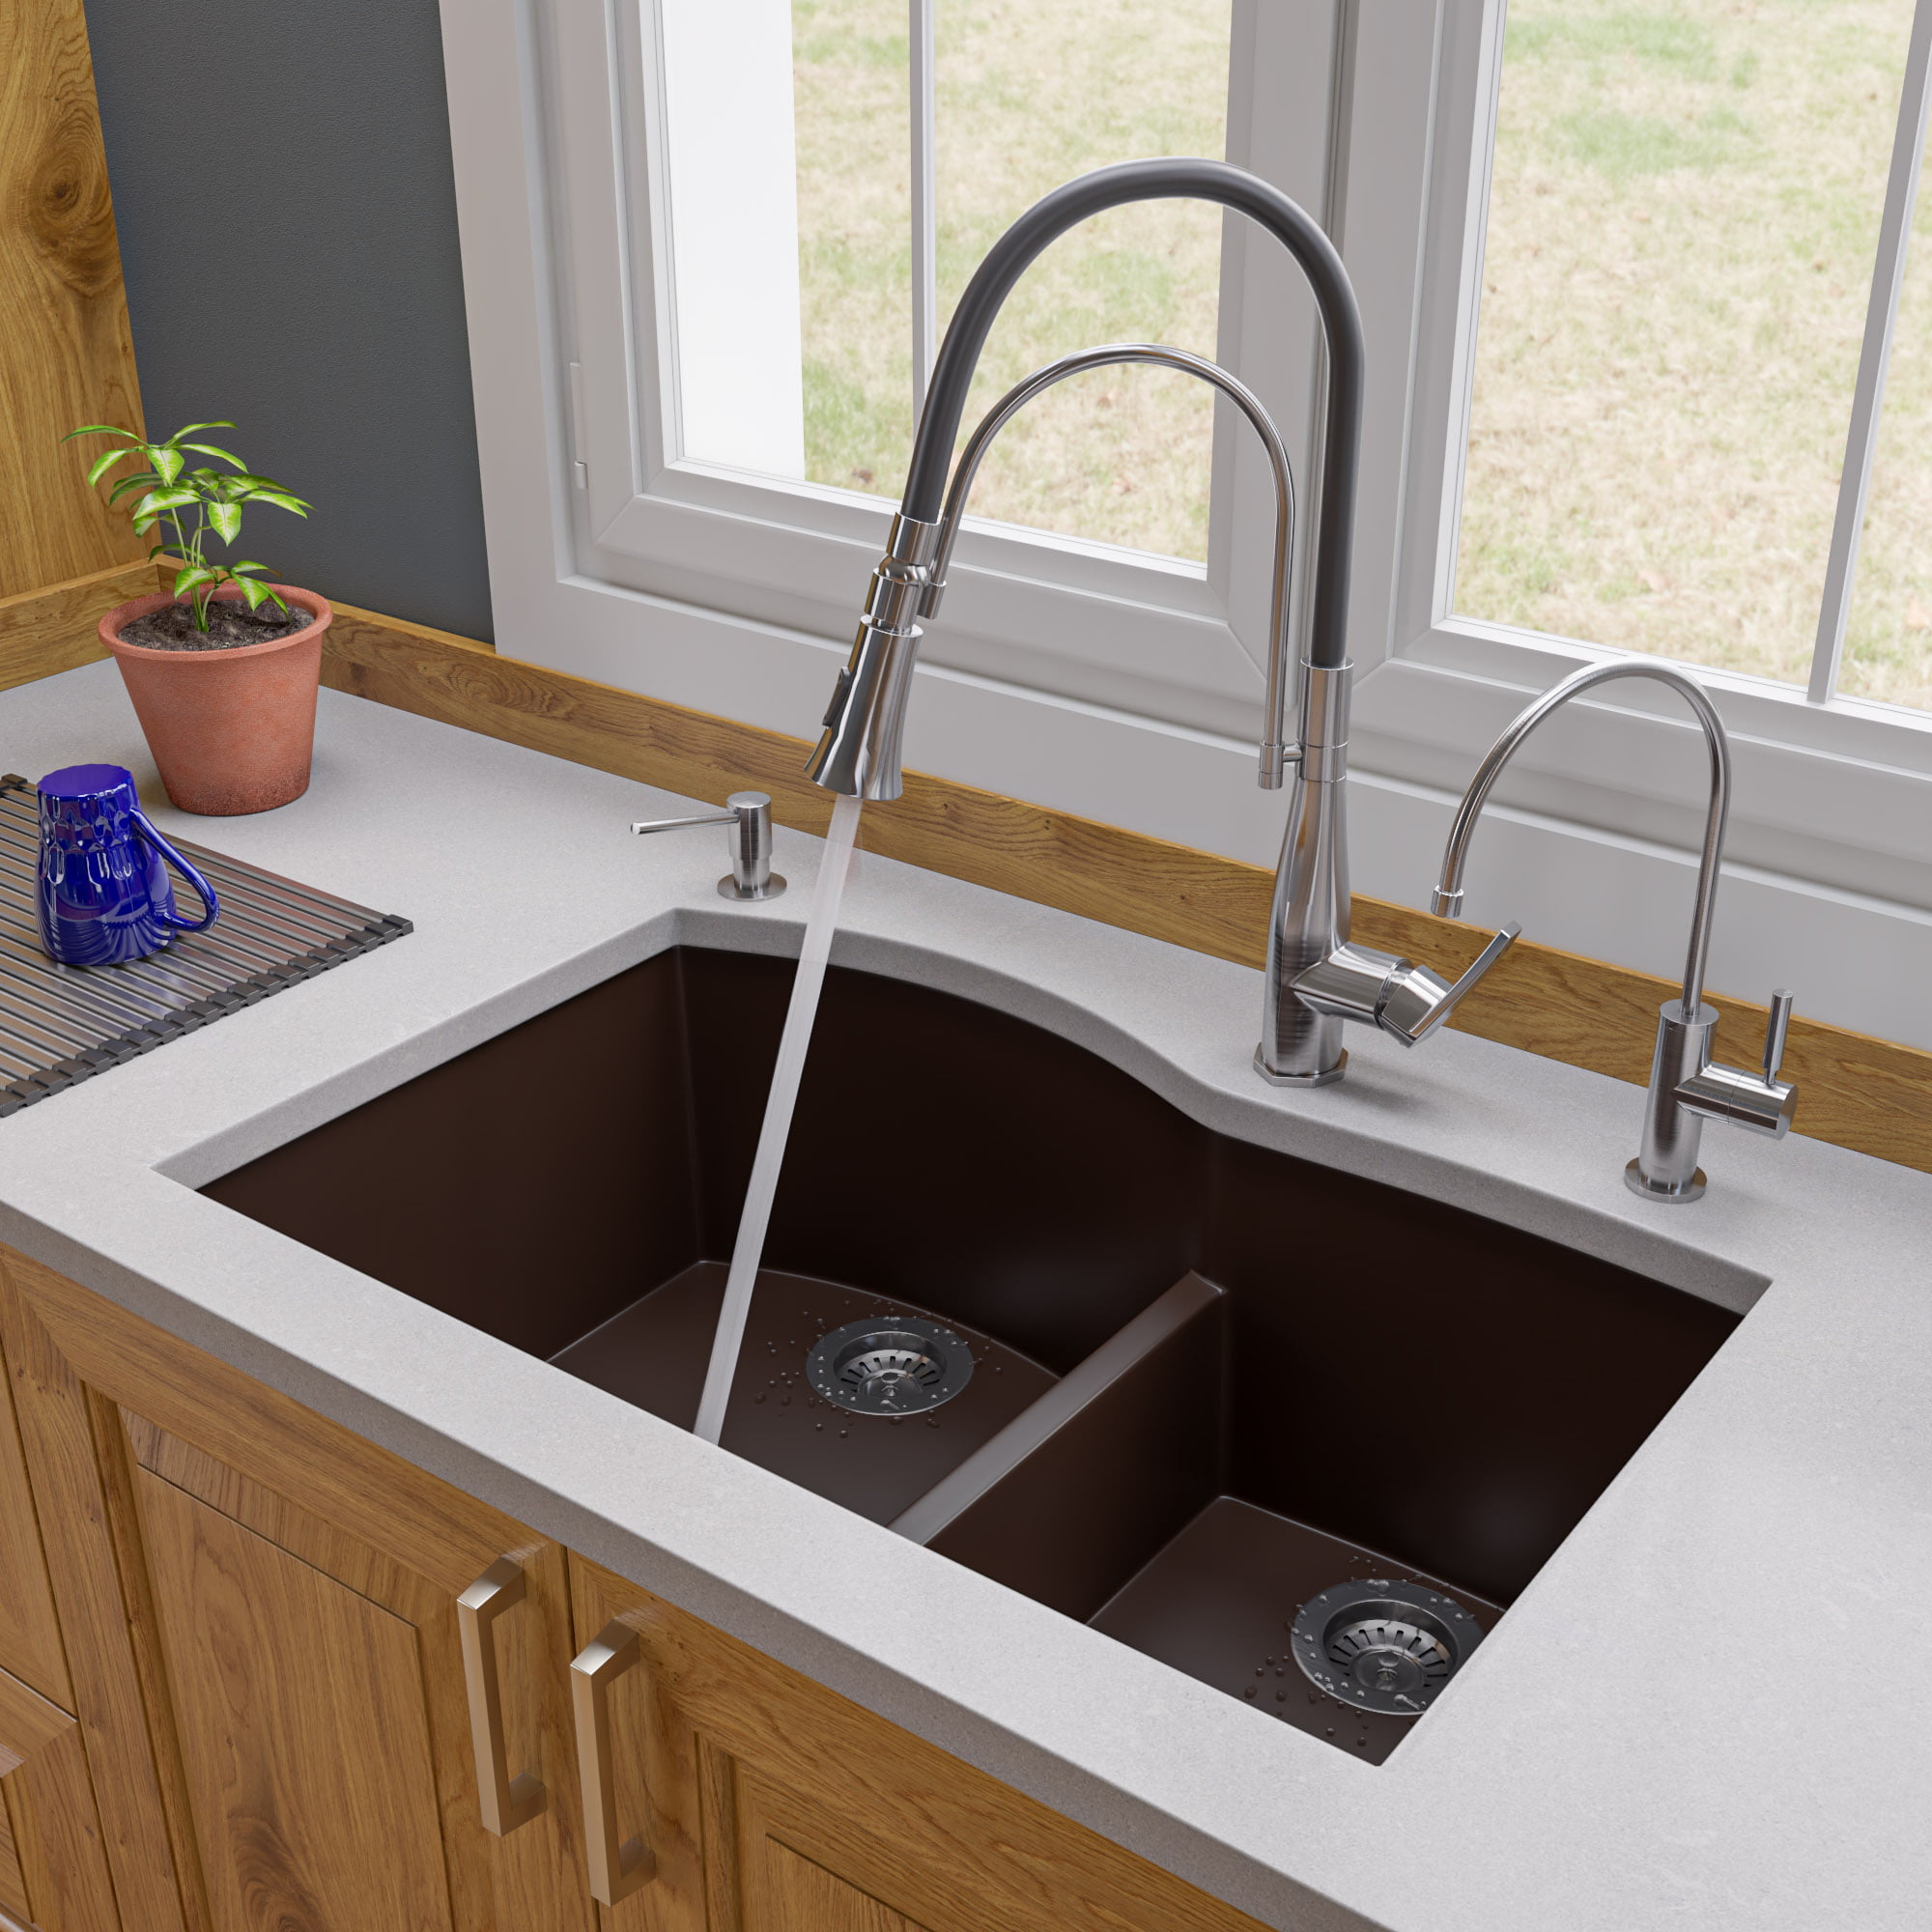 Picture of Alfi Brand AB3320UM-C Undermount Granite Composite 33 in. 35-65 Double Bowl Kitchen Sink in Chocolate